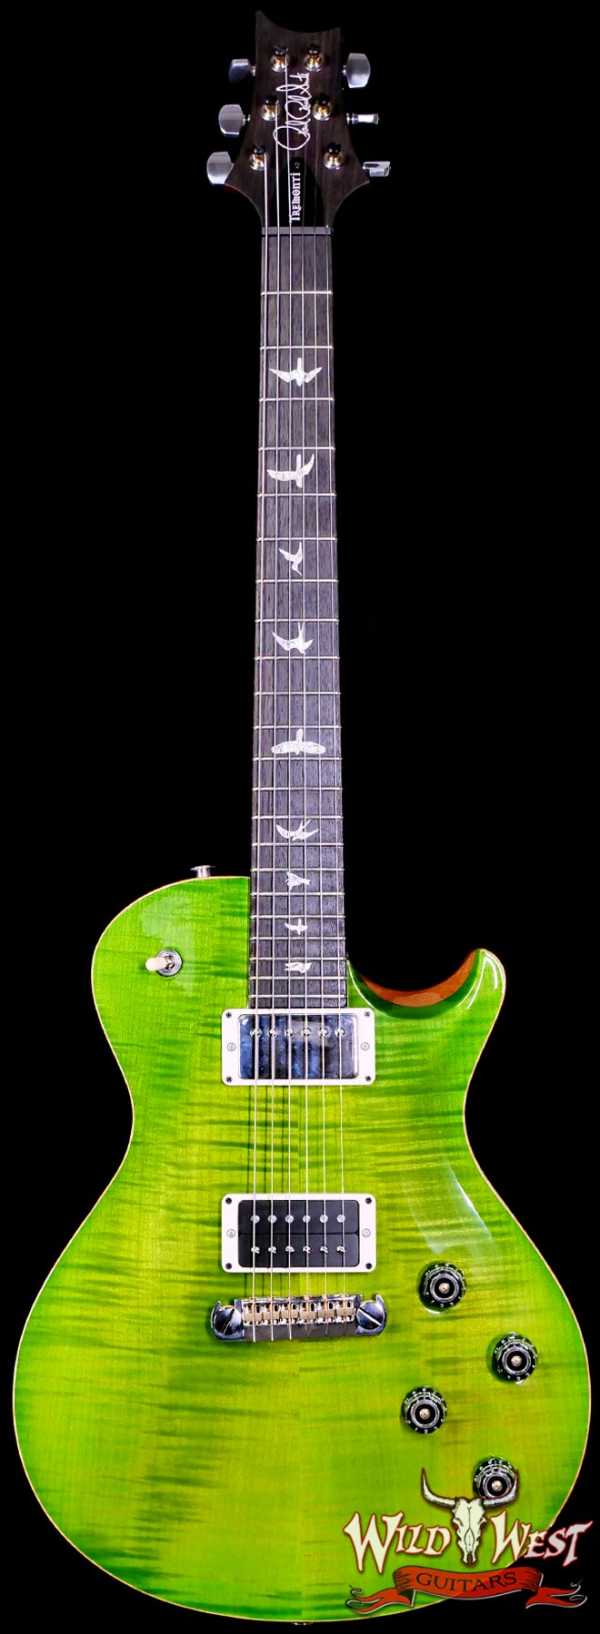 Paul Reed Smith PRS Mark Tremonti Signature Model with Stoptail Eriza Verde 8.75 LBS